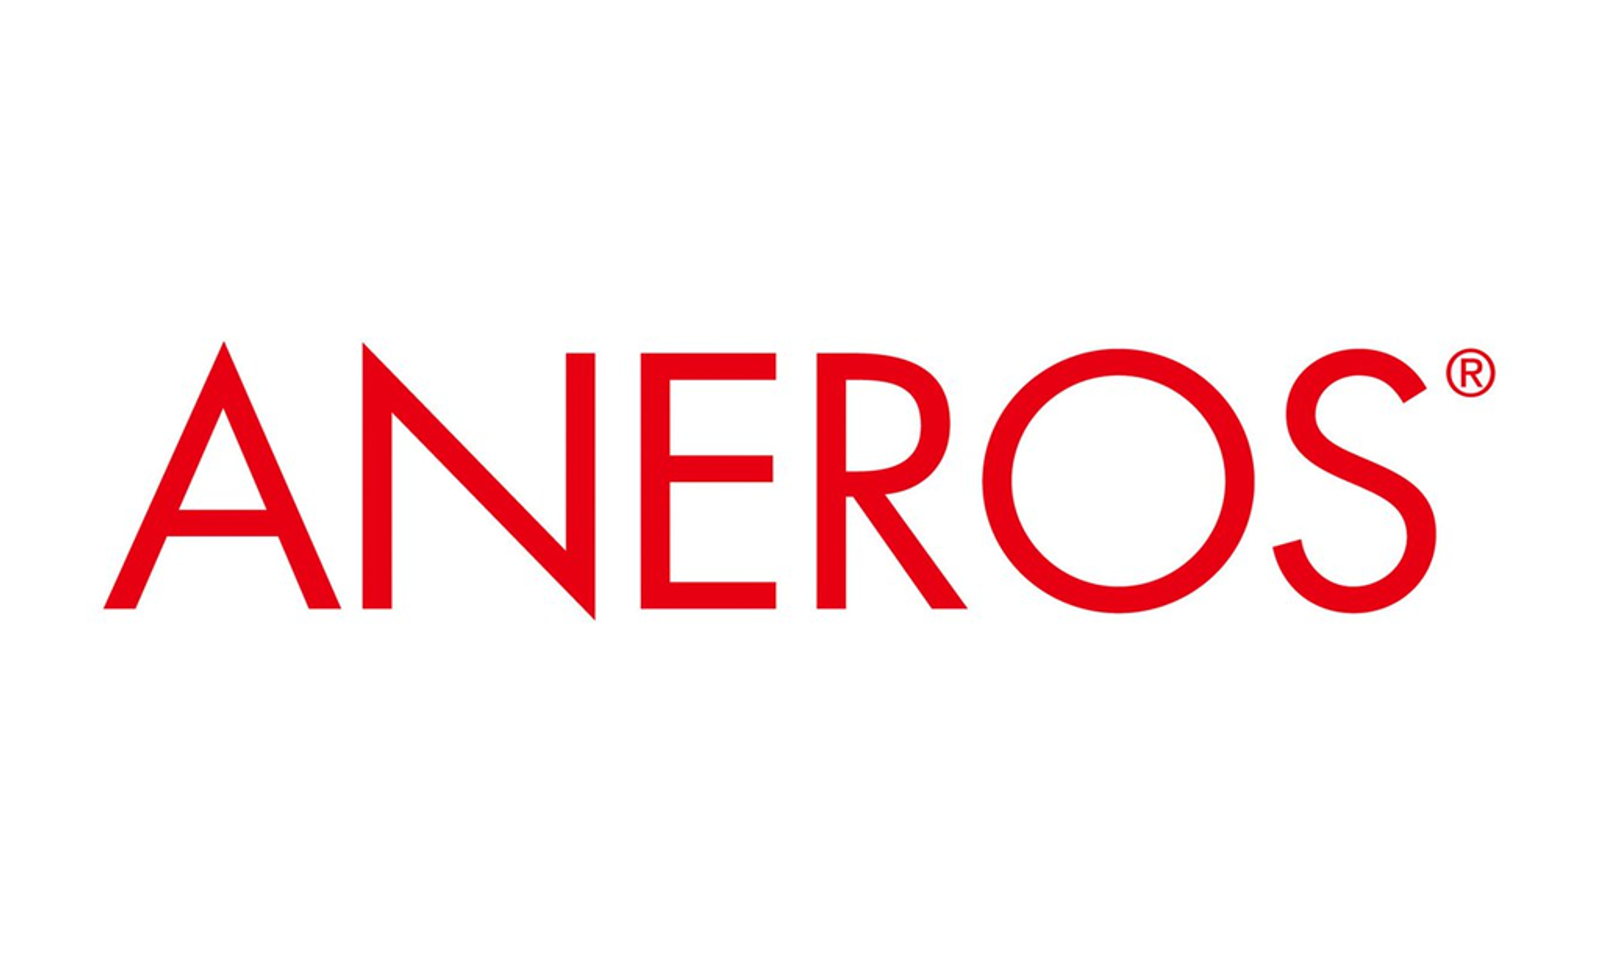 Aneros Debuts New Wellness Device at 2022 July ANME Trade Show